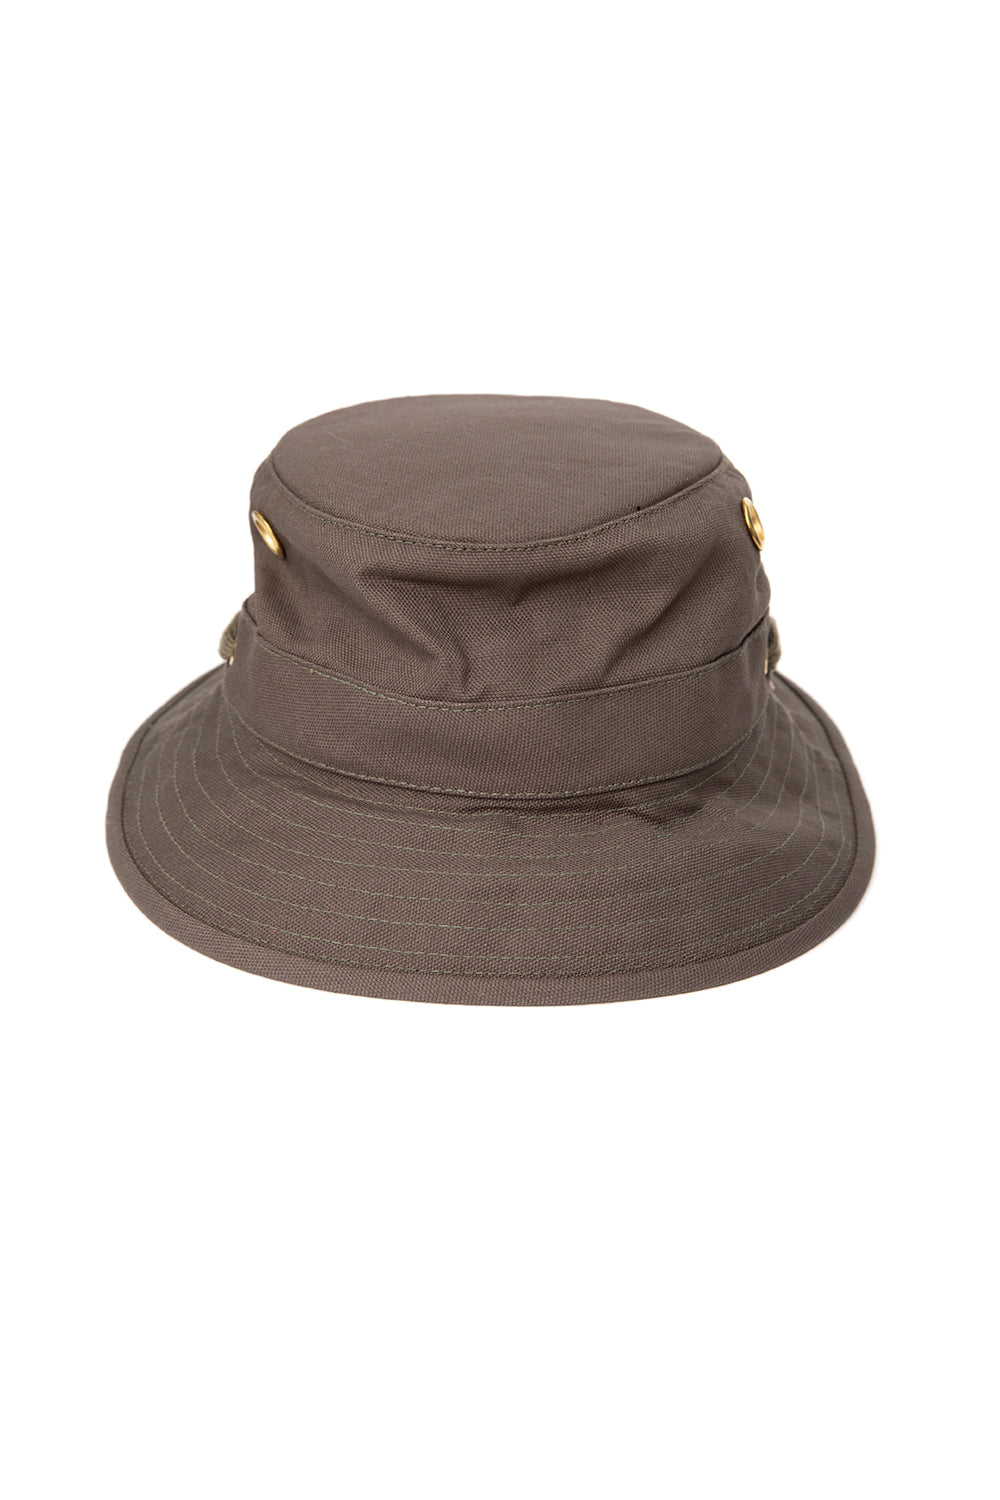    Tilley-The-Iconic-T1-Bucket-Hat-Olive